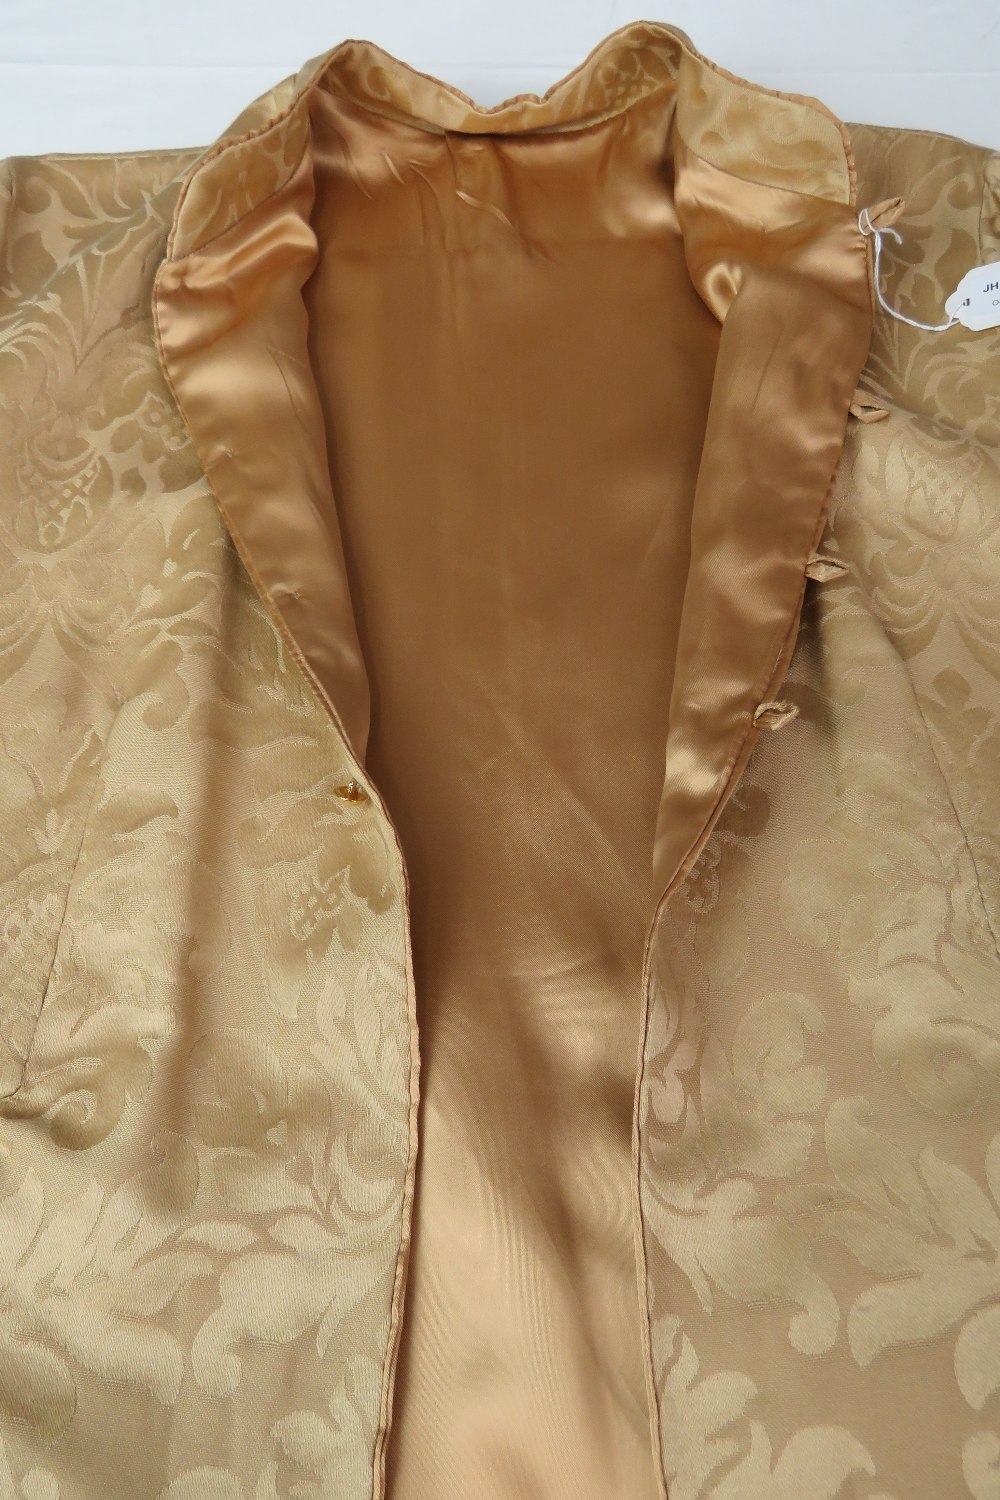 Ladies jacket; 'gold' fabric with Mandarin collar and four button closure, no labels. - Image 3 of 3